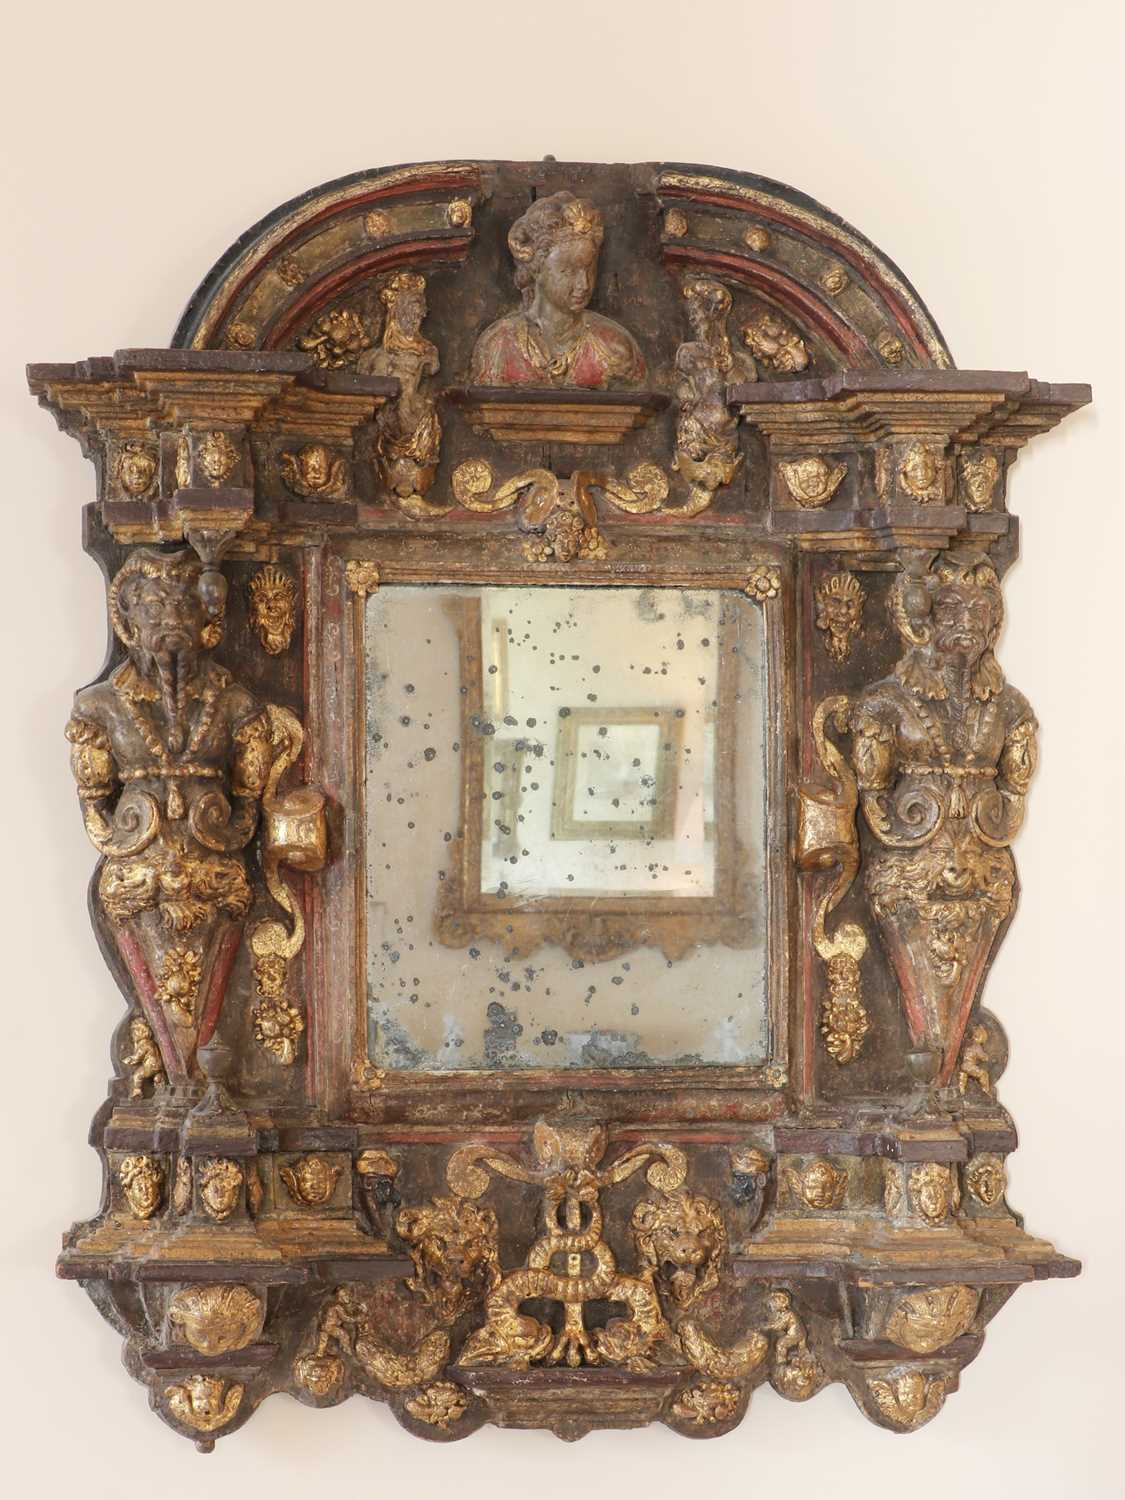 A Renaissance-style painted and parcel-gilt tabernacle mirror, - Image 3 of 69